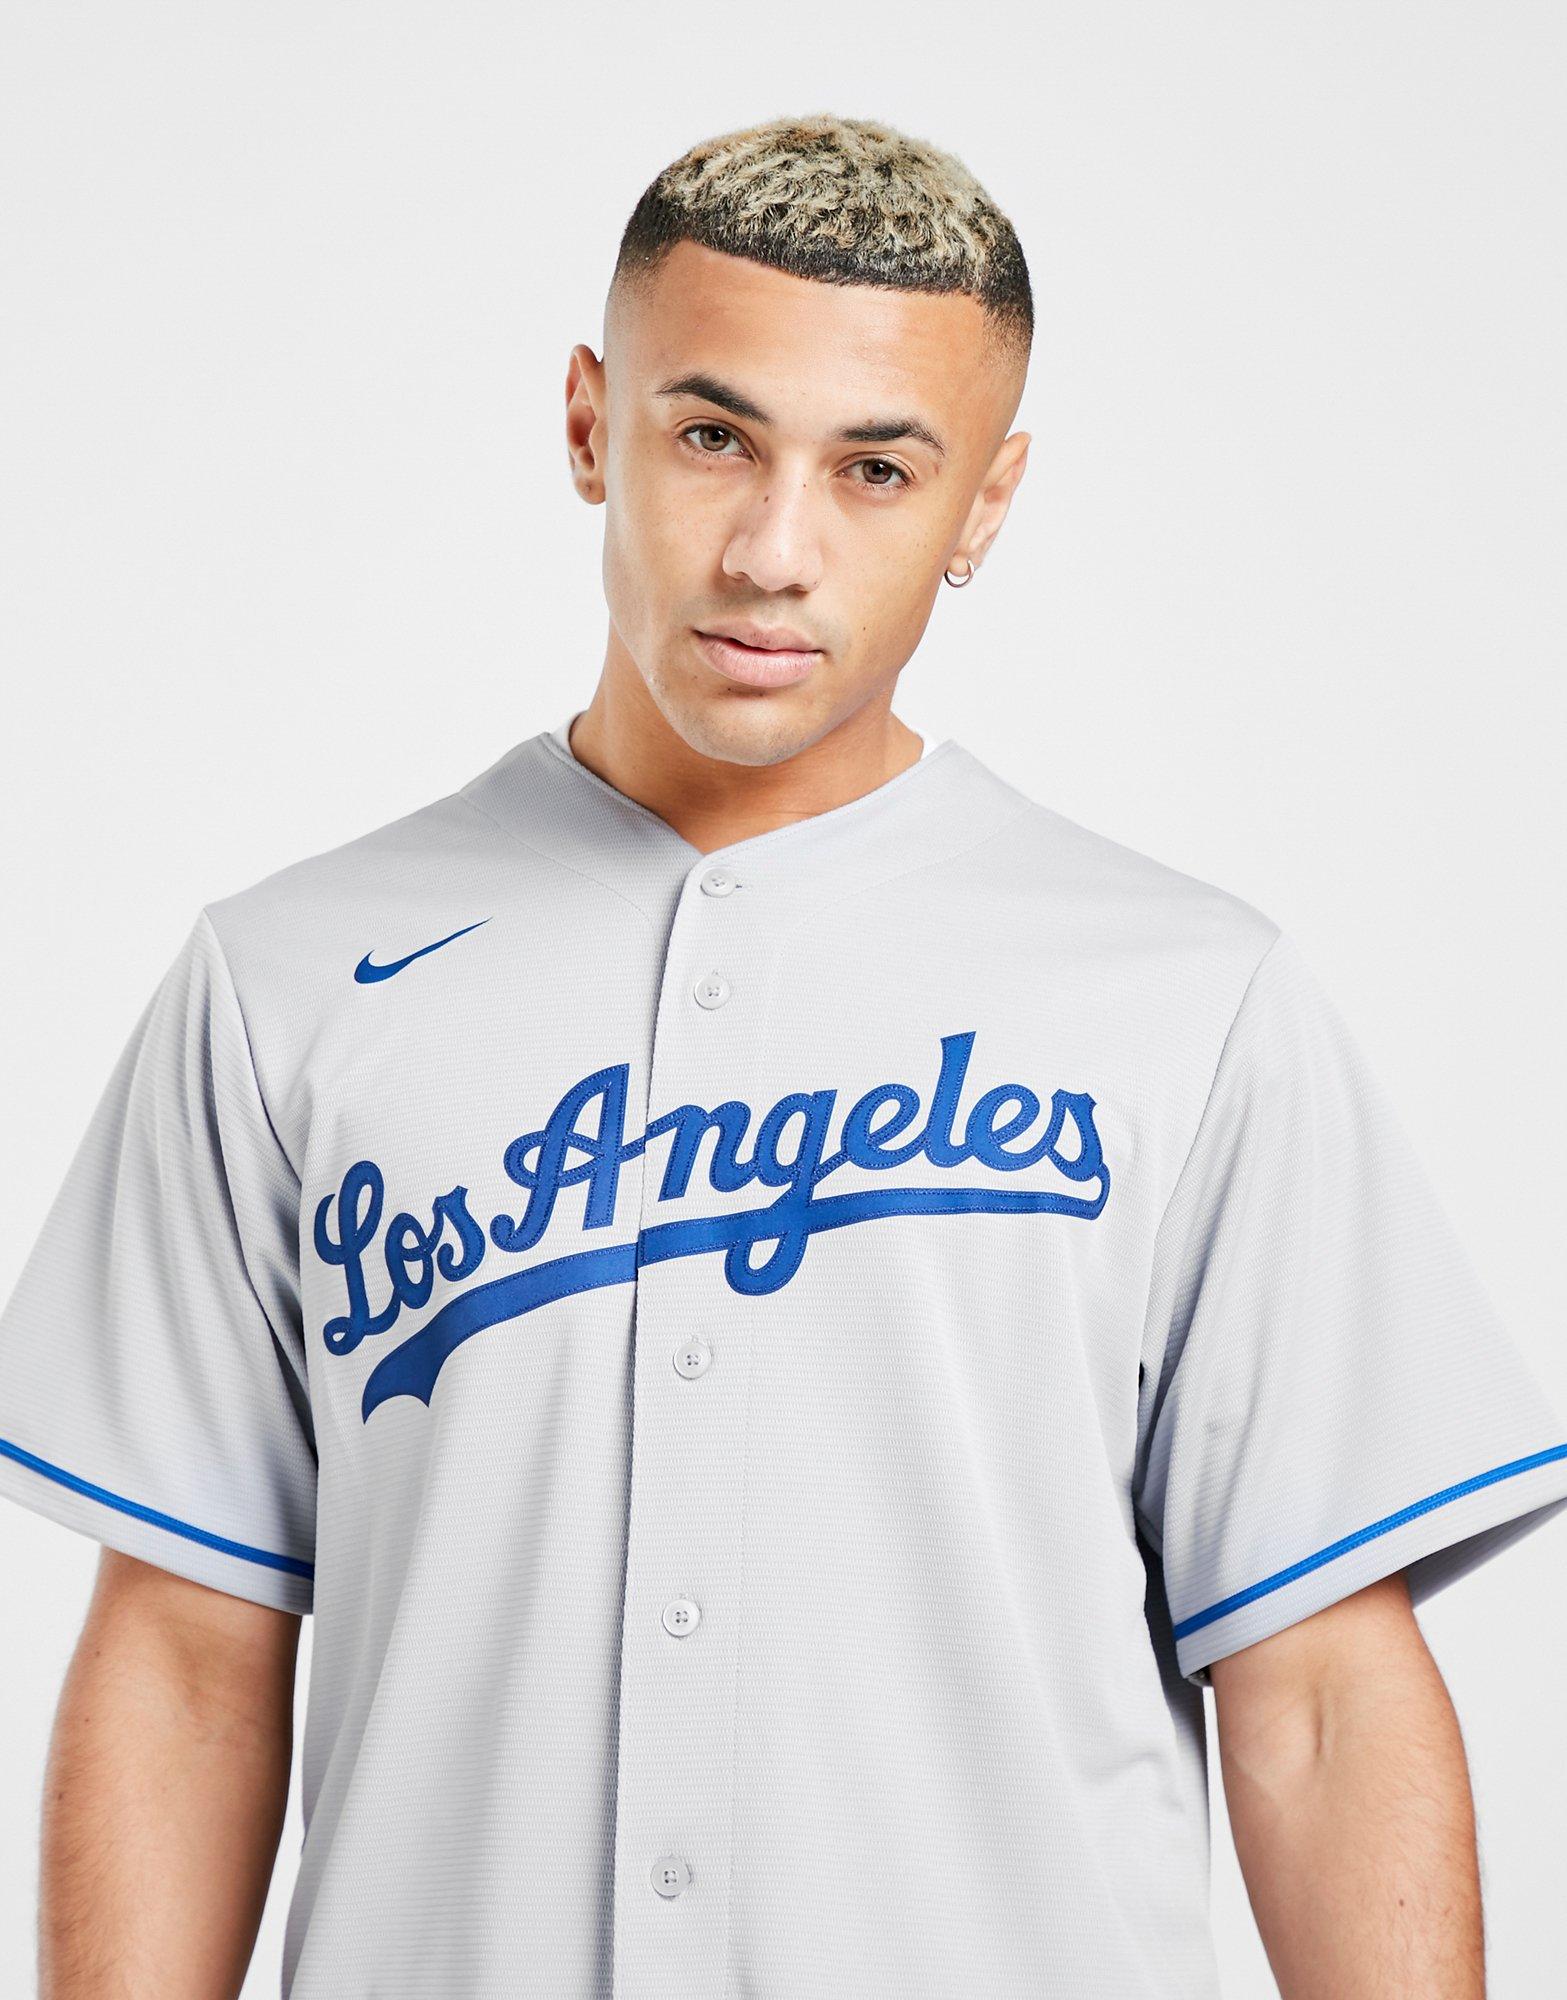 los angeles dodgers road jersey